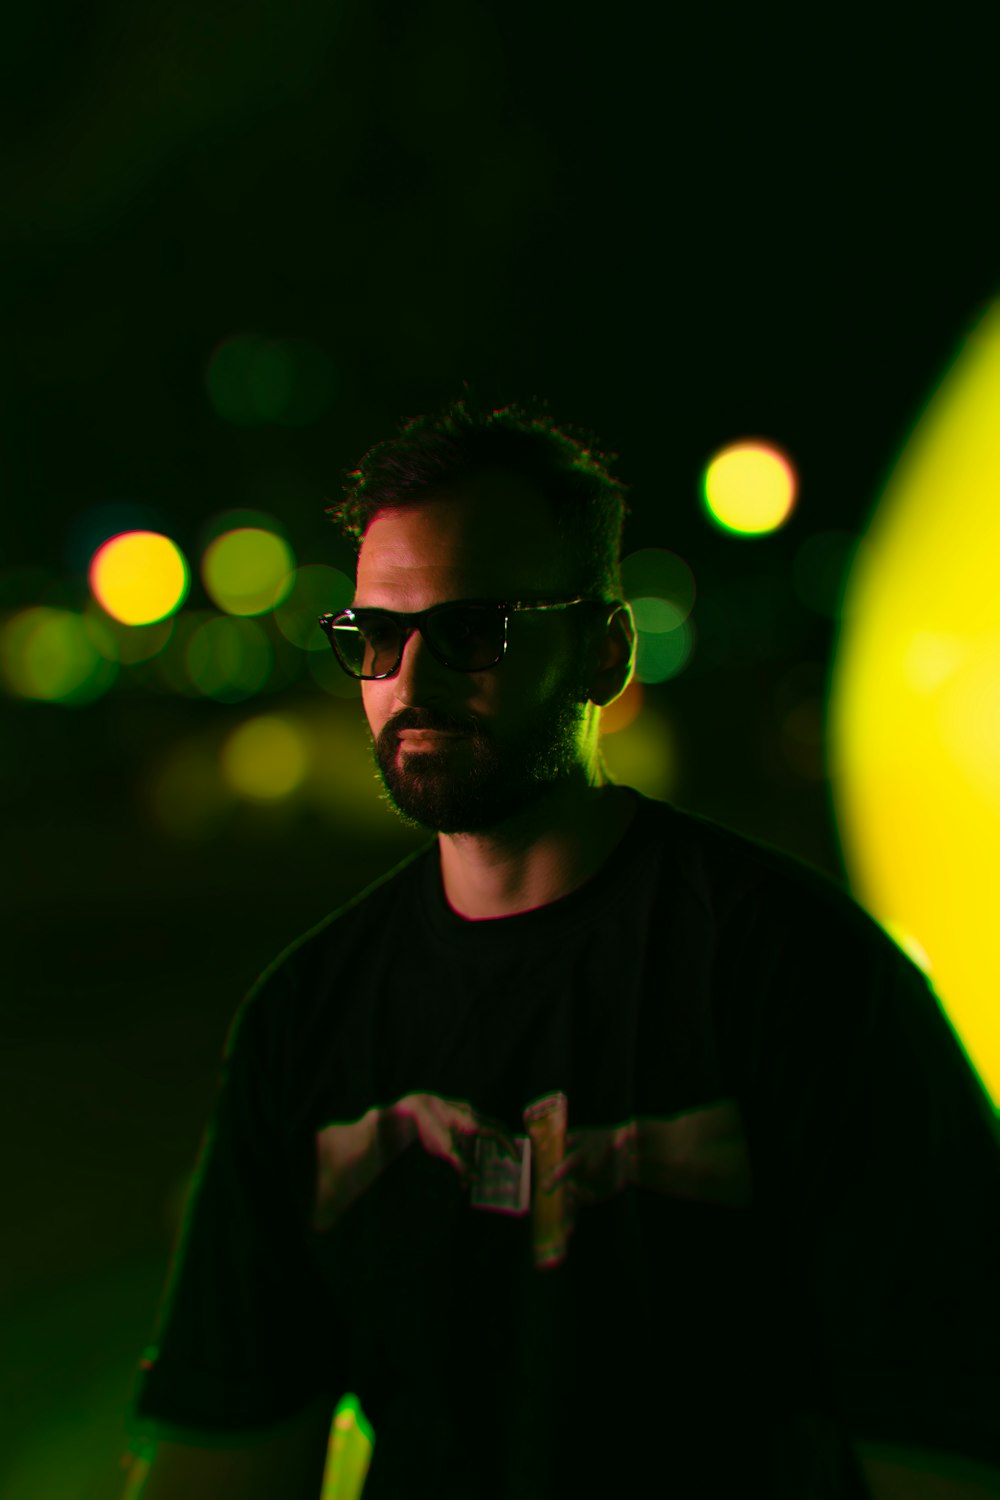 a man wearing sunglasses standing in the dark